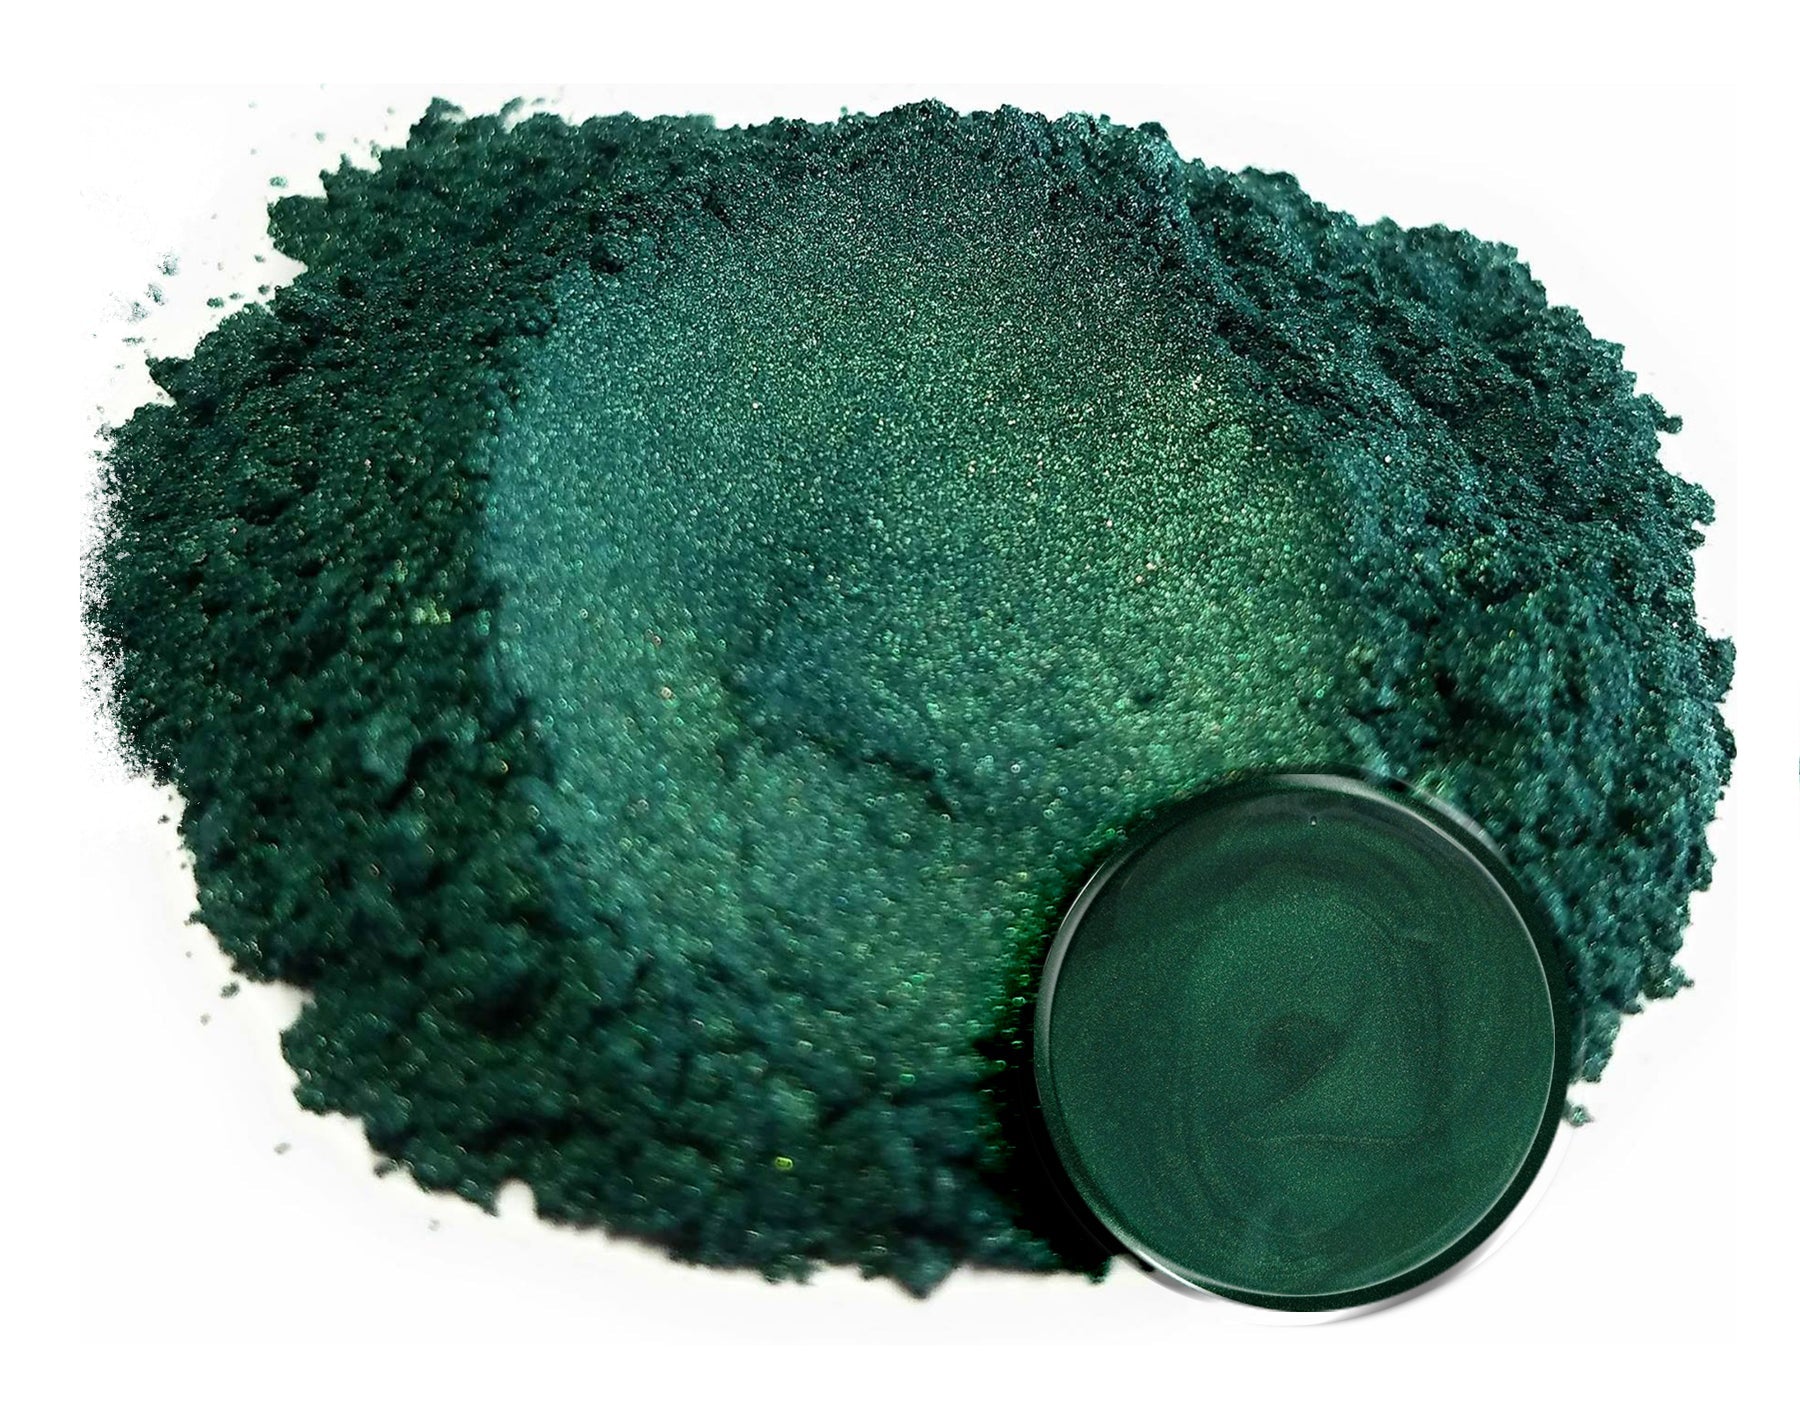 Powdered pigment by eye candy pigments for epoxy resin projects. In the color Dark Ocean Green.  